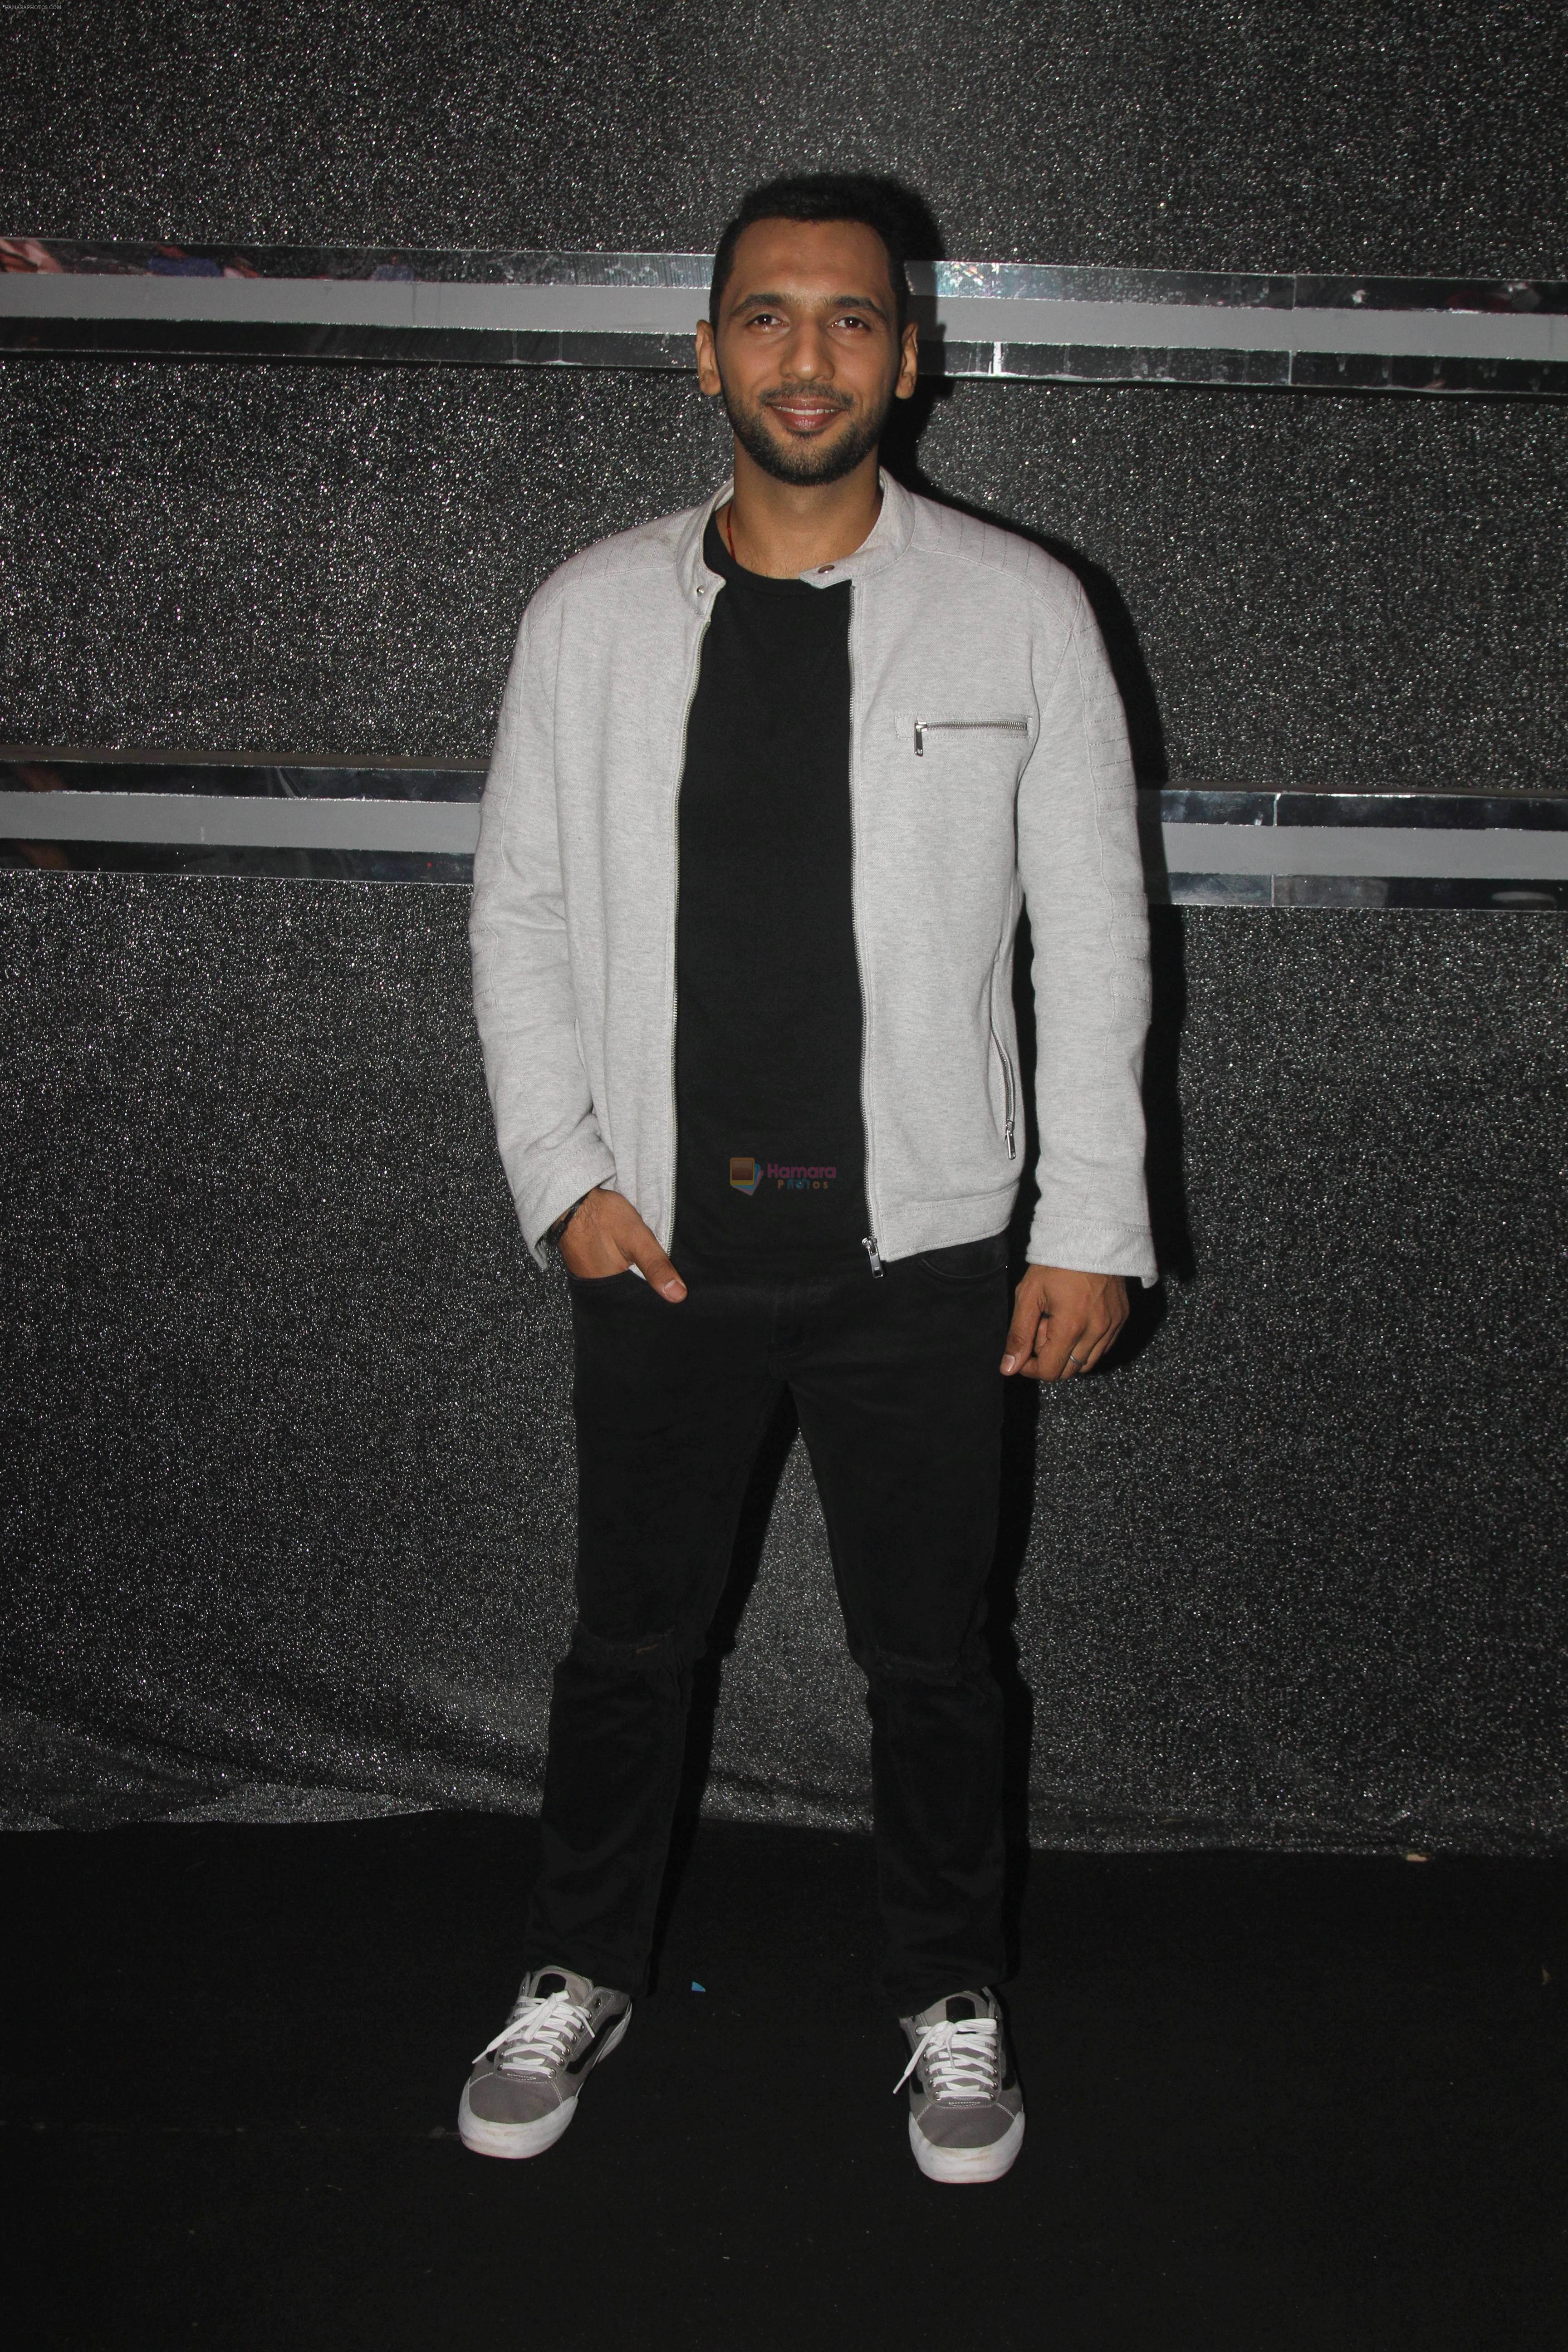 Punit Pathak on the sets of Color's Dance Deewane in Filmcity, Goregaon , Mumbai on 25th June 2018